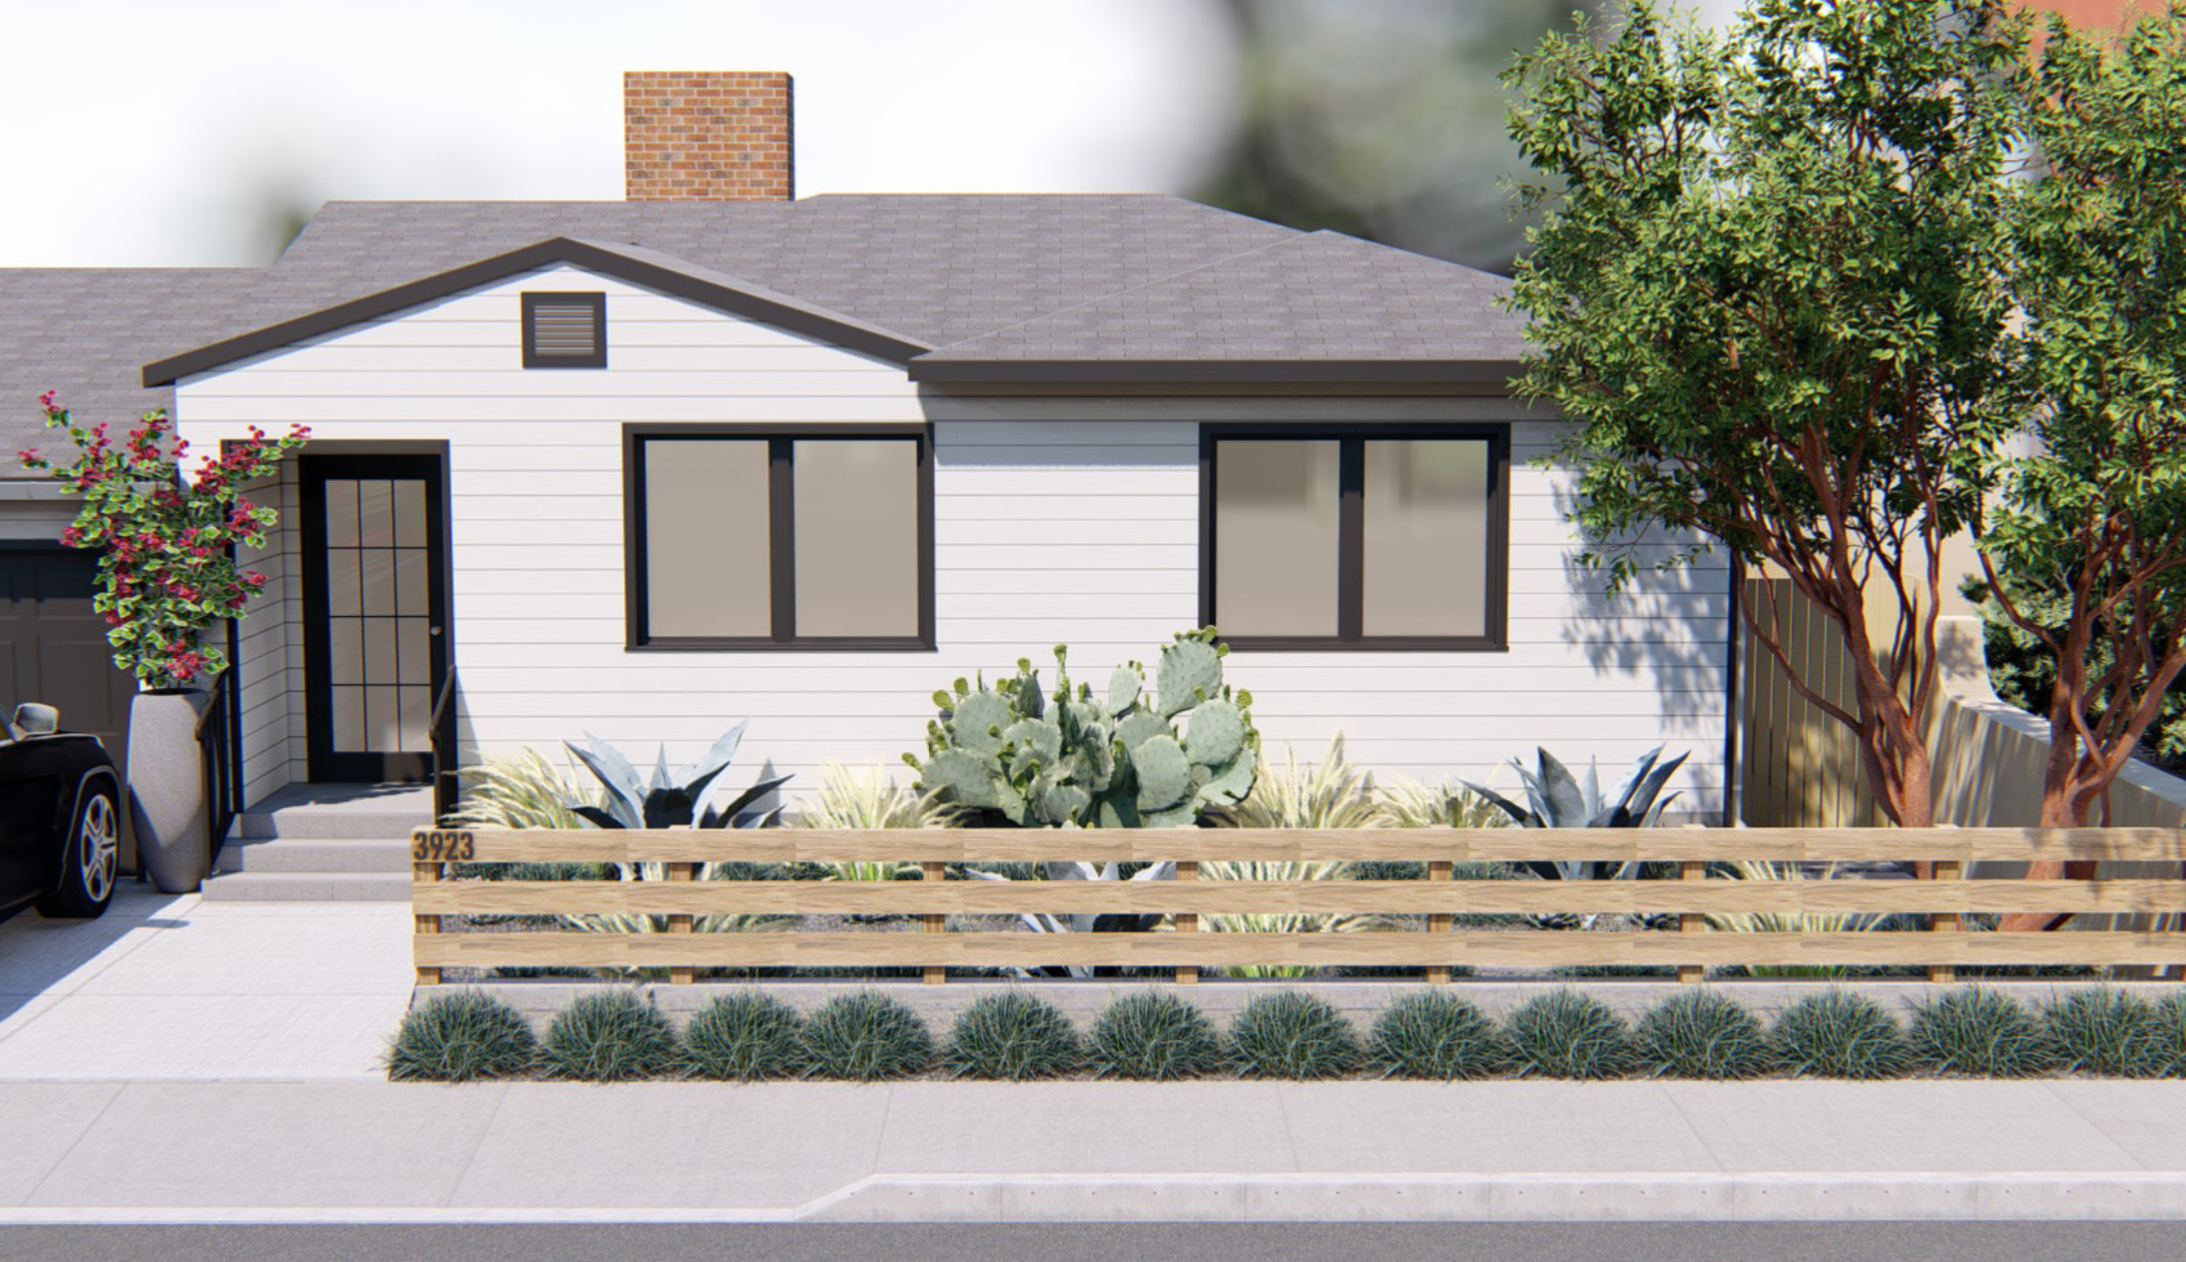 The front yard of the home features the same poured-in-place concrete pavers and beach pebbles that are used in the backyard, and the plantings also coordinate. The fence will be extended with a gate across the driveway.